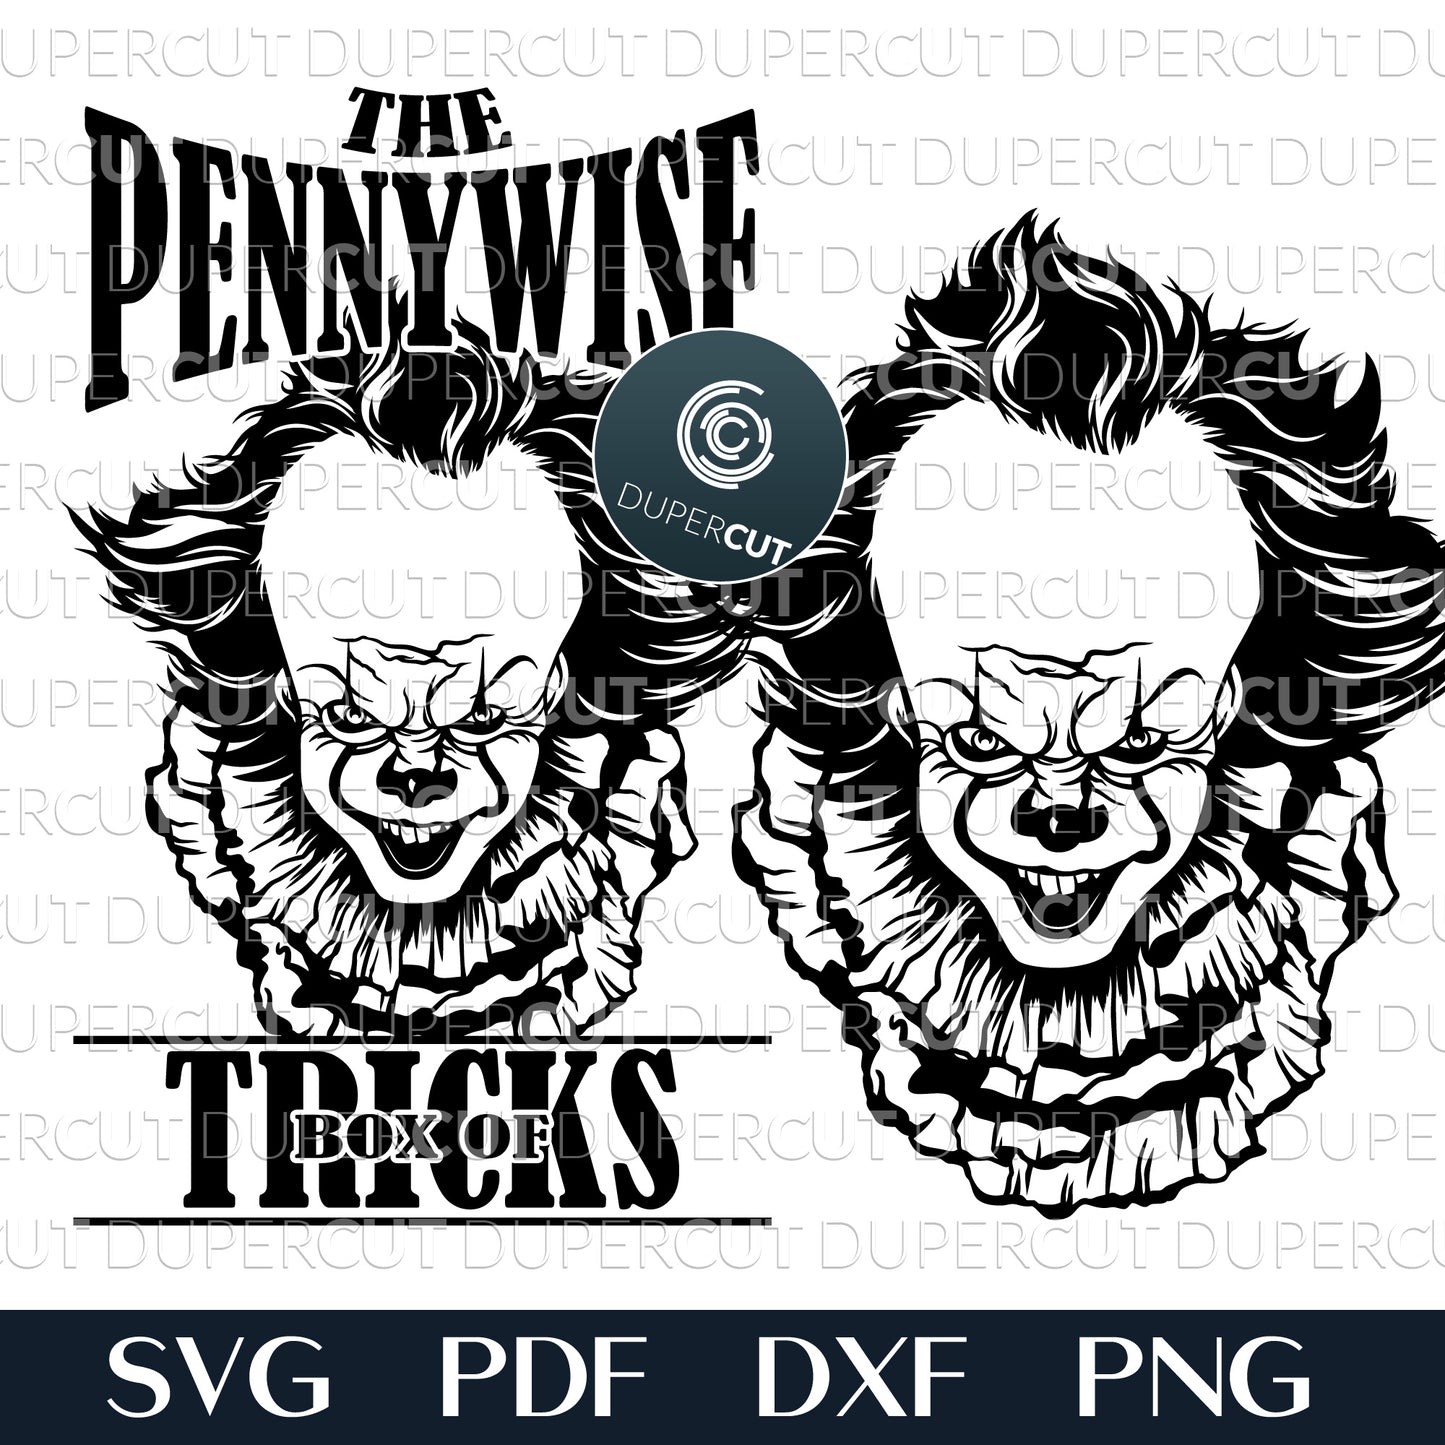 The Pennywise Box of Tricks illustration, line art black and white design. SVG PDF DXF vector cutting files for laser, Glowforge, Cricut